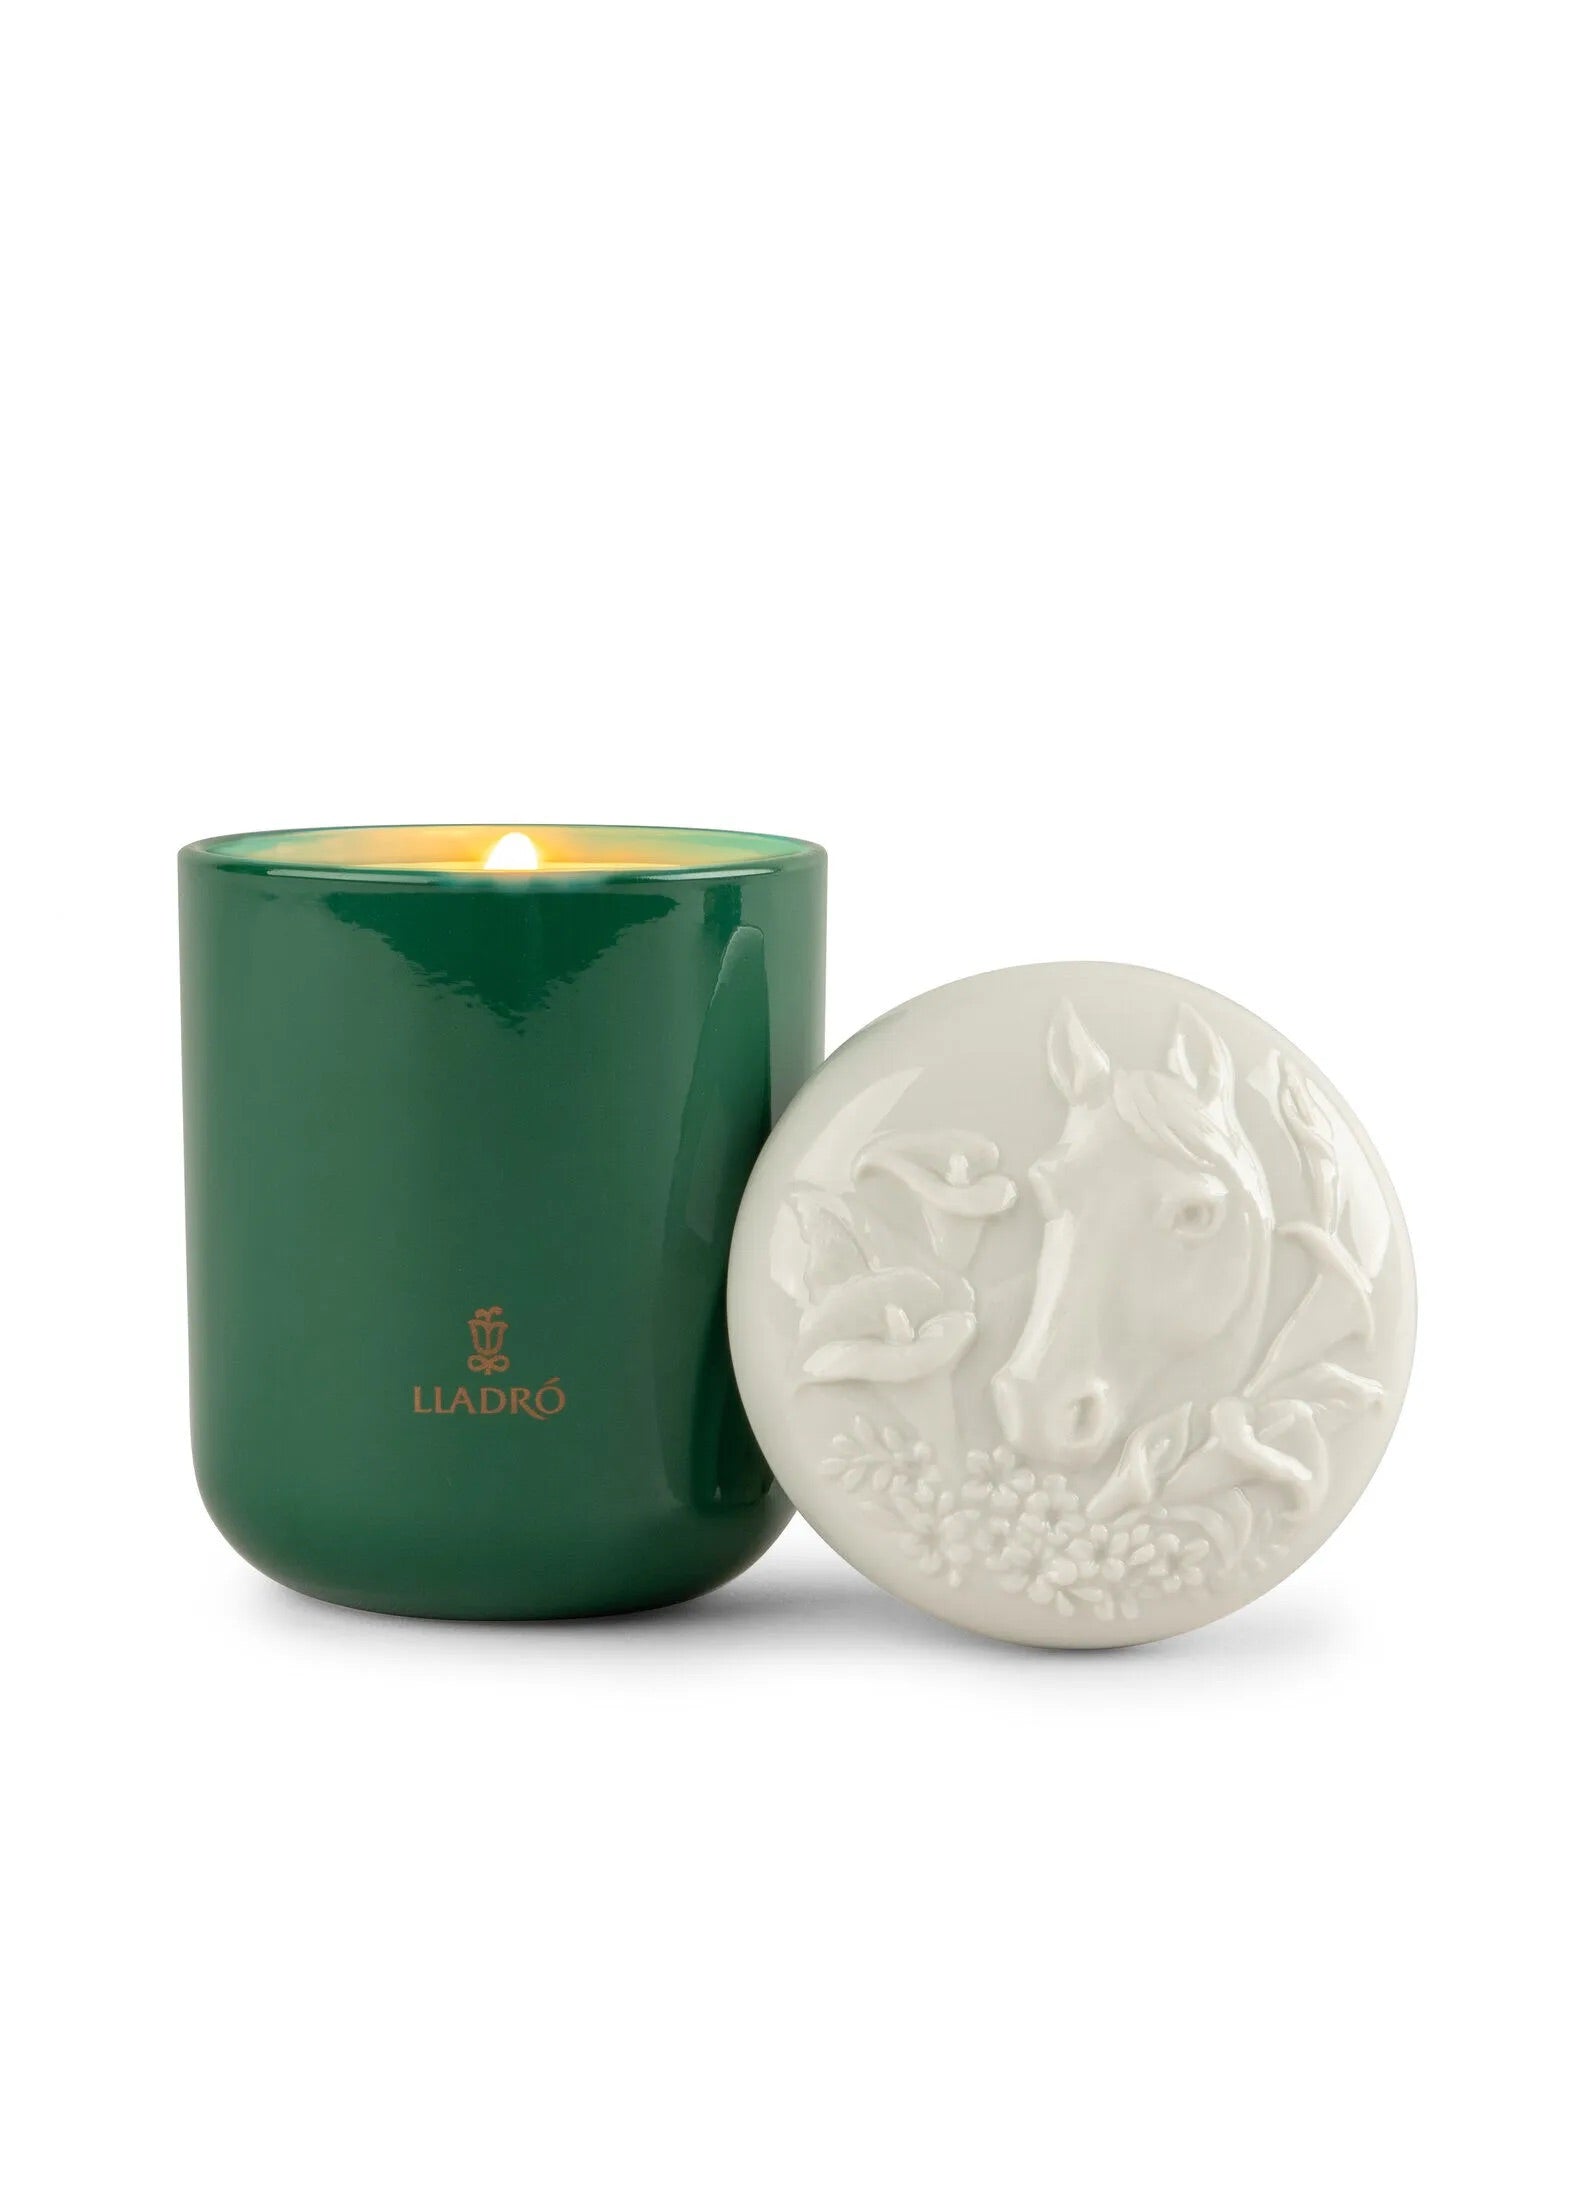 Zodiac Scented Candles Collection - FormFluent